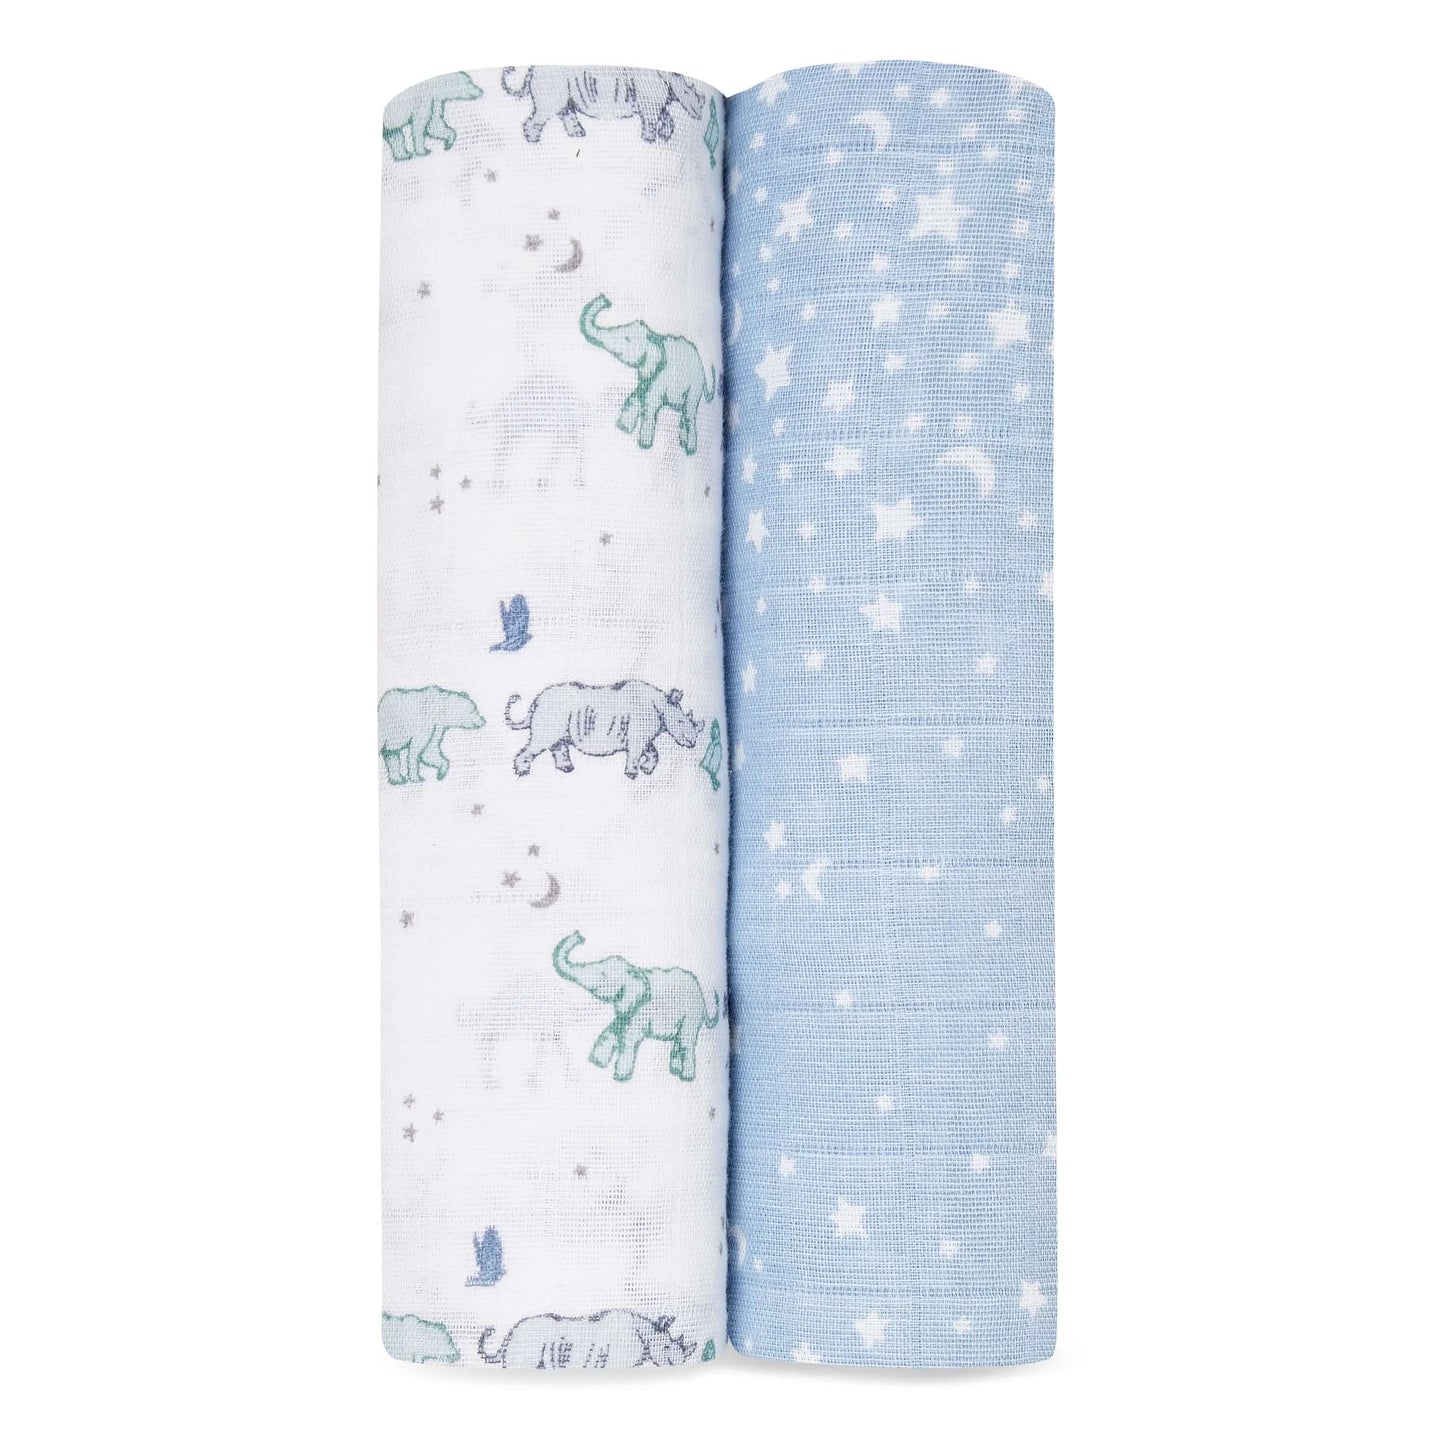 Pack of 2 aden  + anais breathable cotton muslin swaddles each measuring 120cm x 120cm.